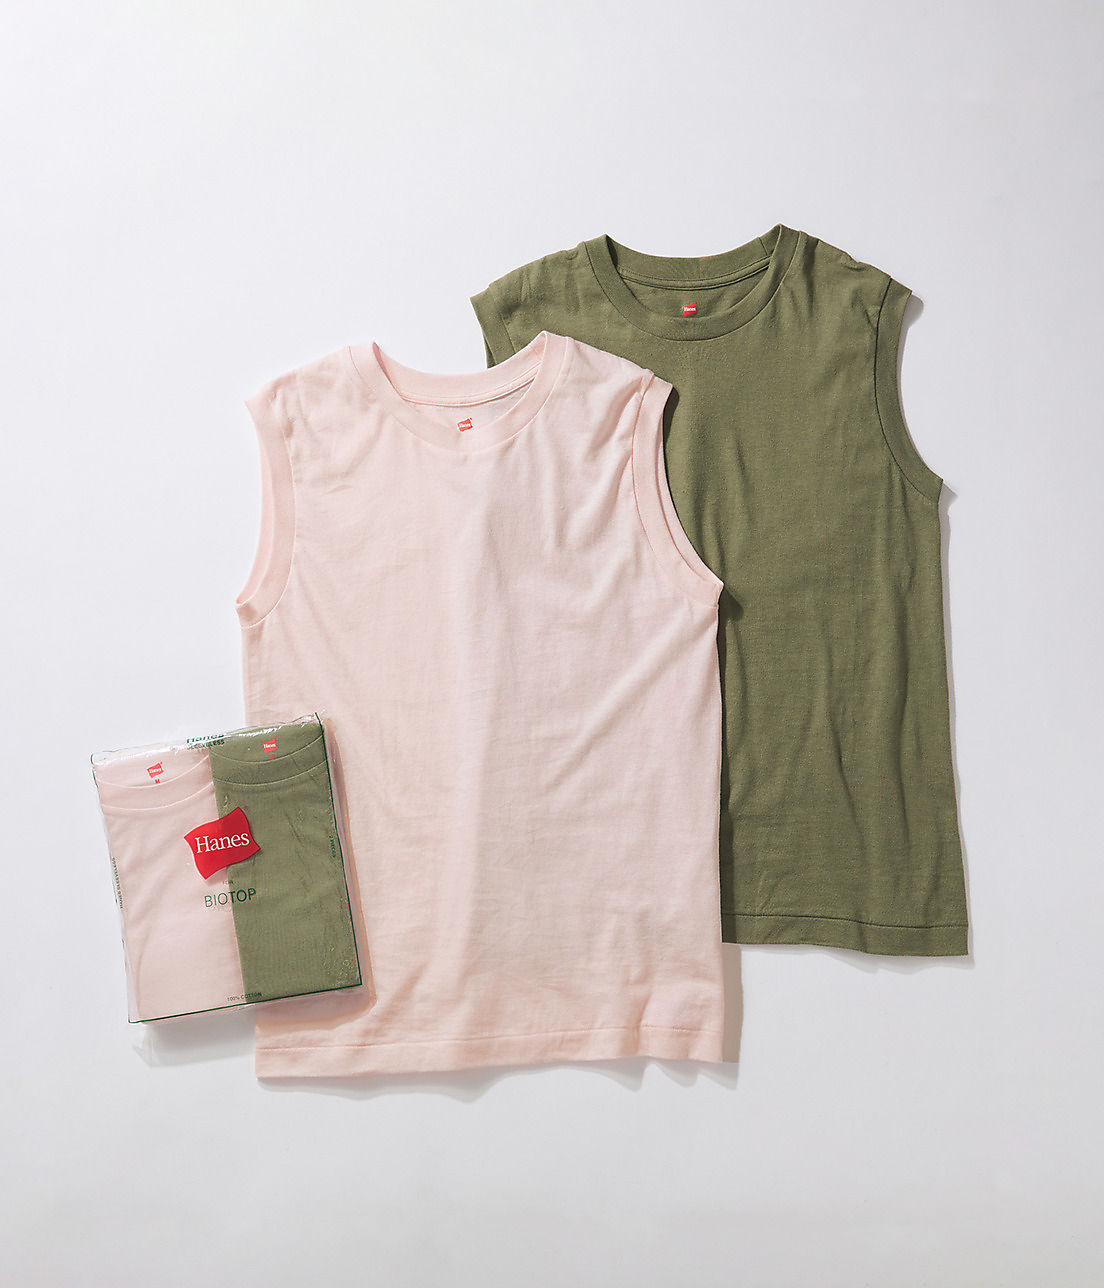 ADAM ET ROPE’
【Hanes for BIOTOP】Sleeveless T-Shirts/color
￥5,280　ピンク×カーキ